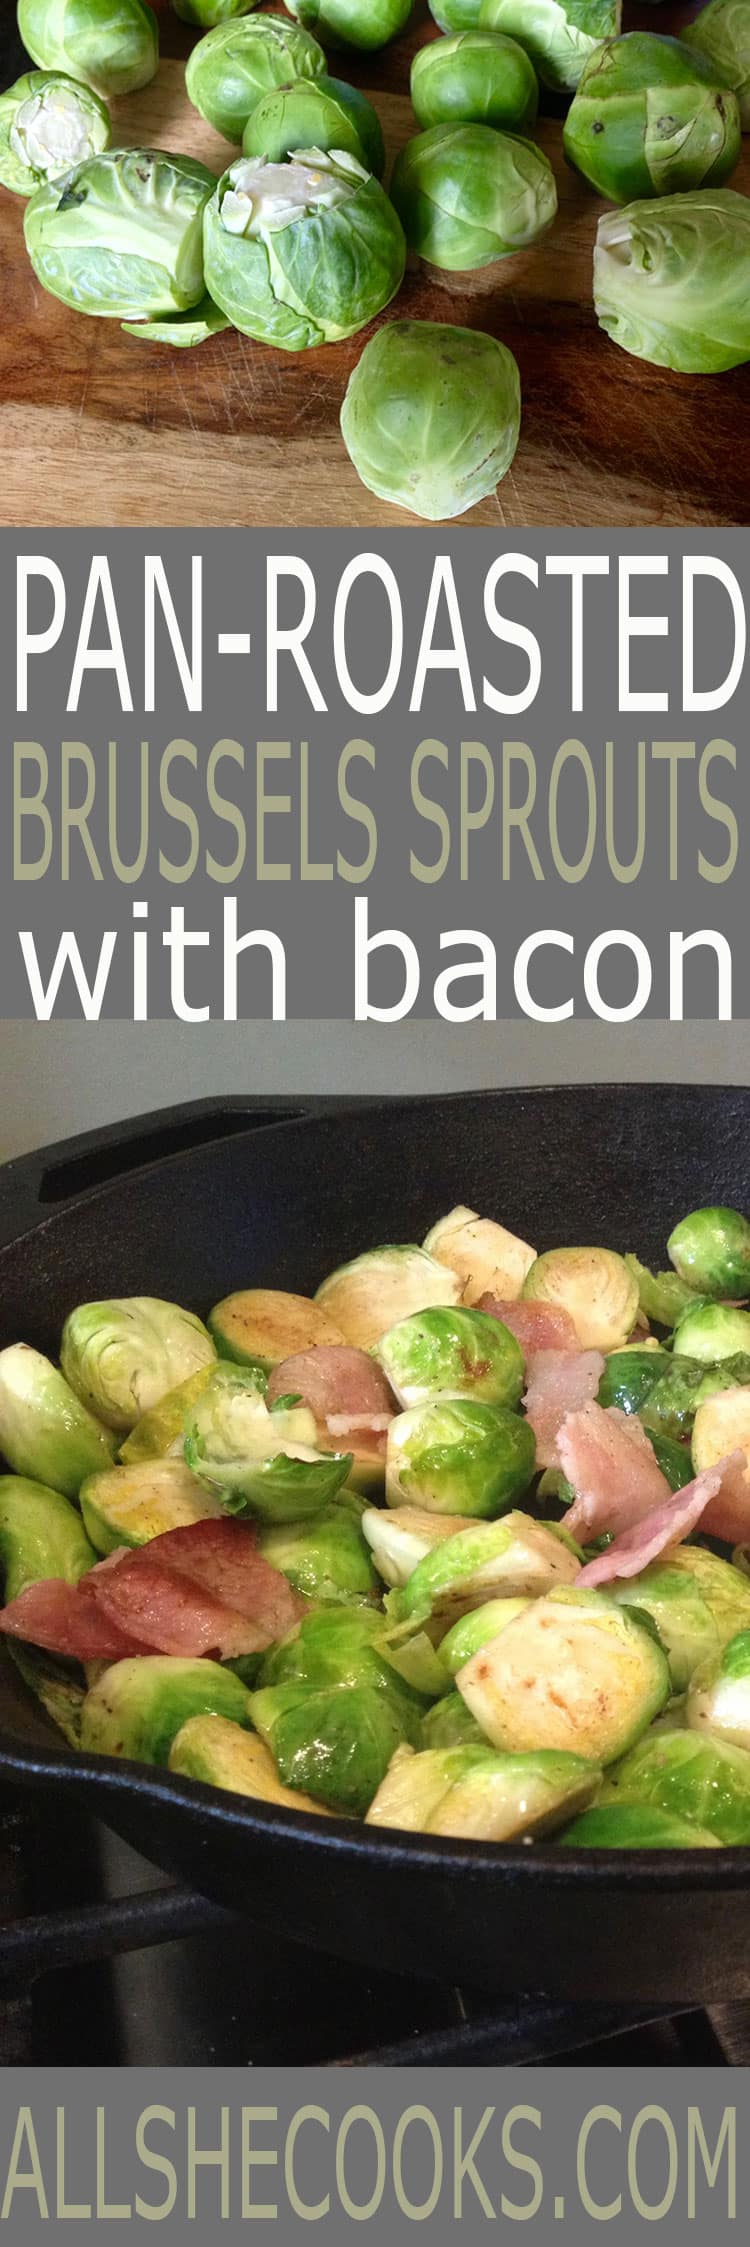 Perfect side dish recipe. Pan Roasted Brussels Sprouts make a nice low-carb side to pork or chicken.